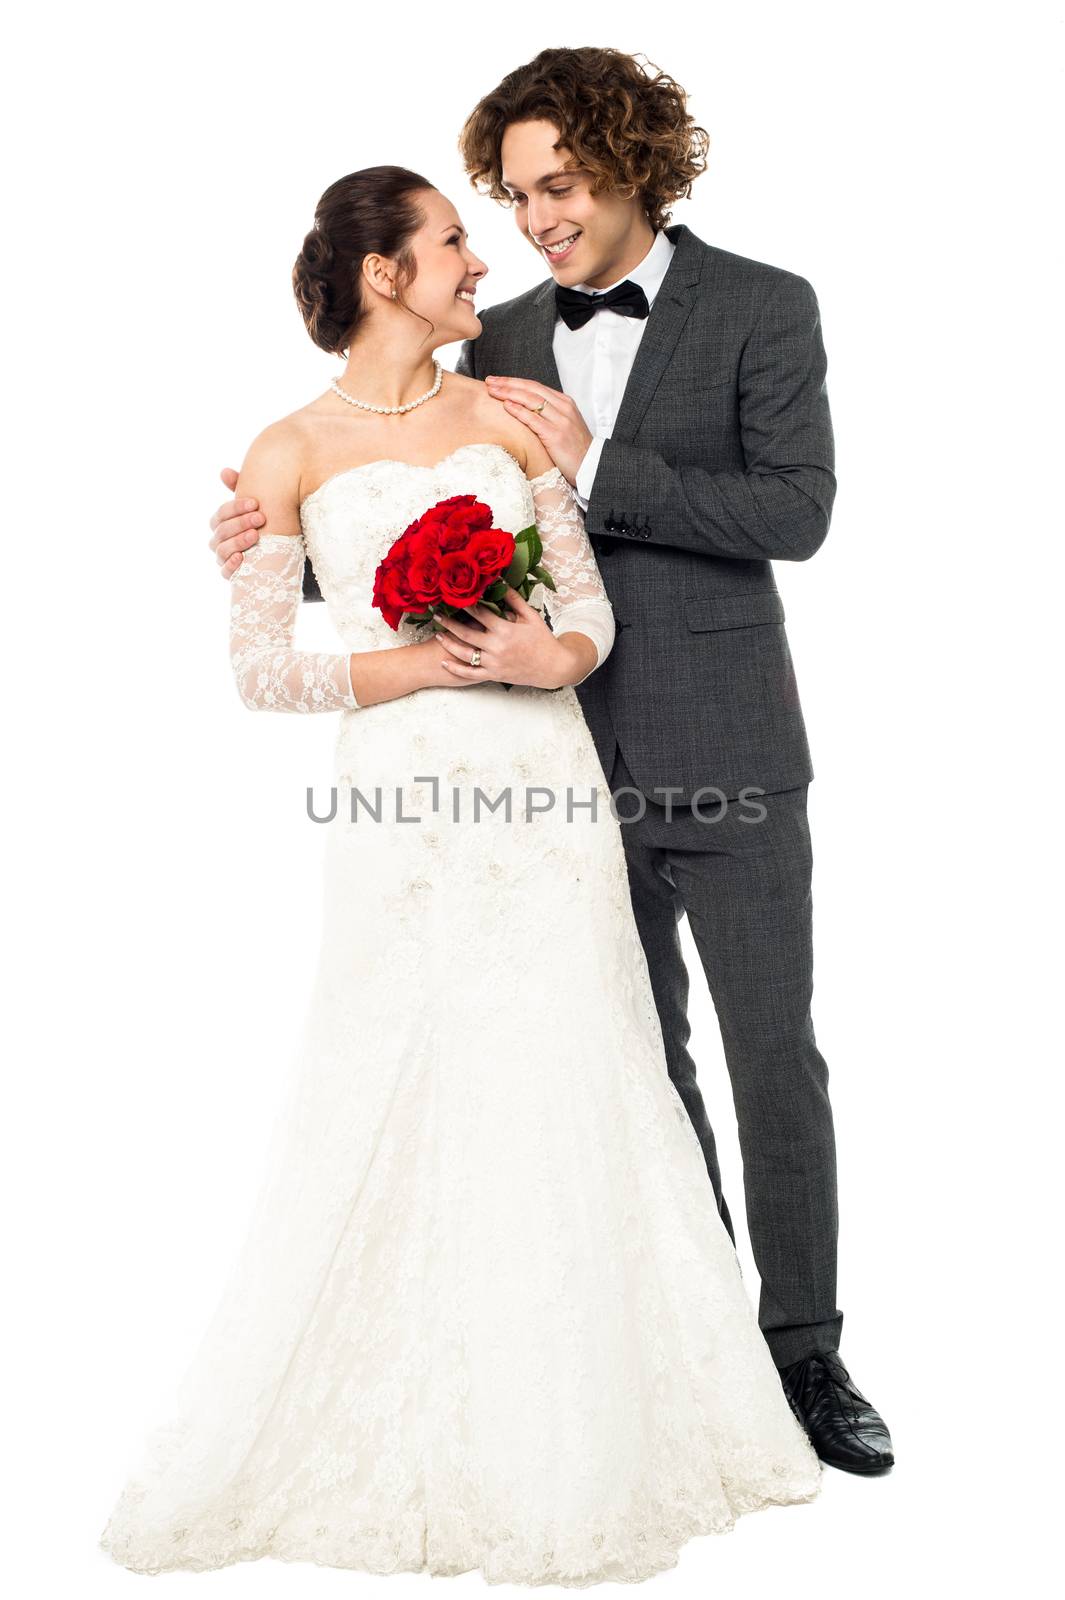 Romantic couple in bridal attire lost in each other